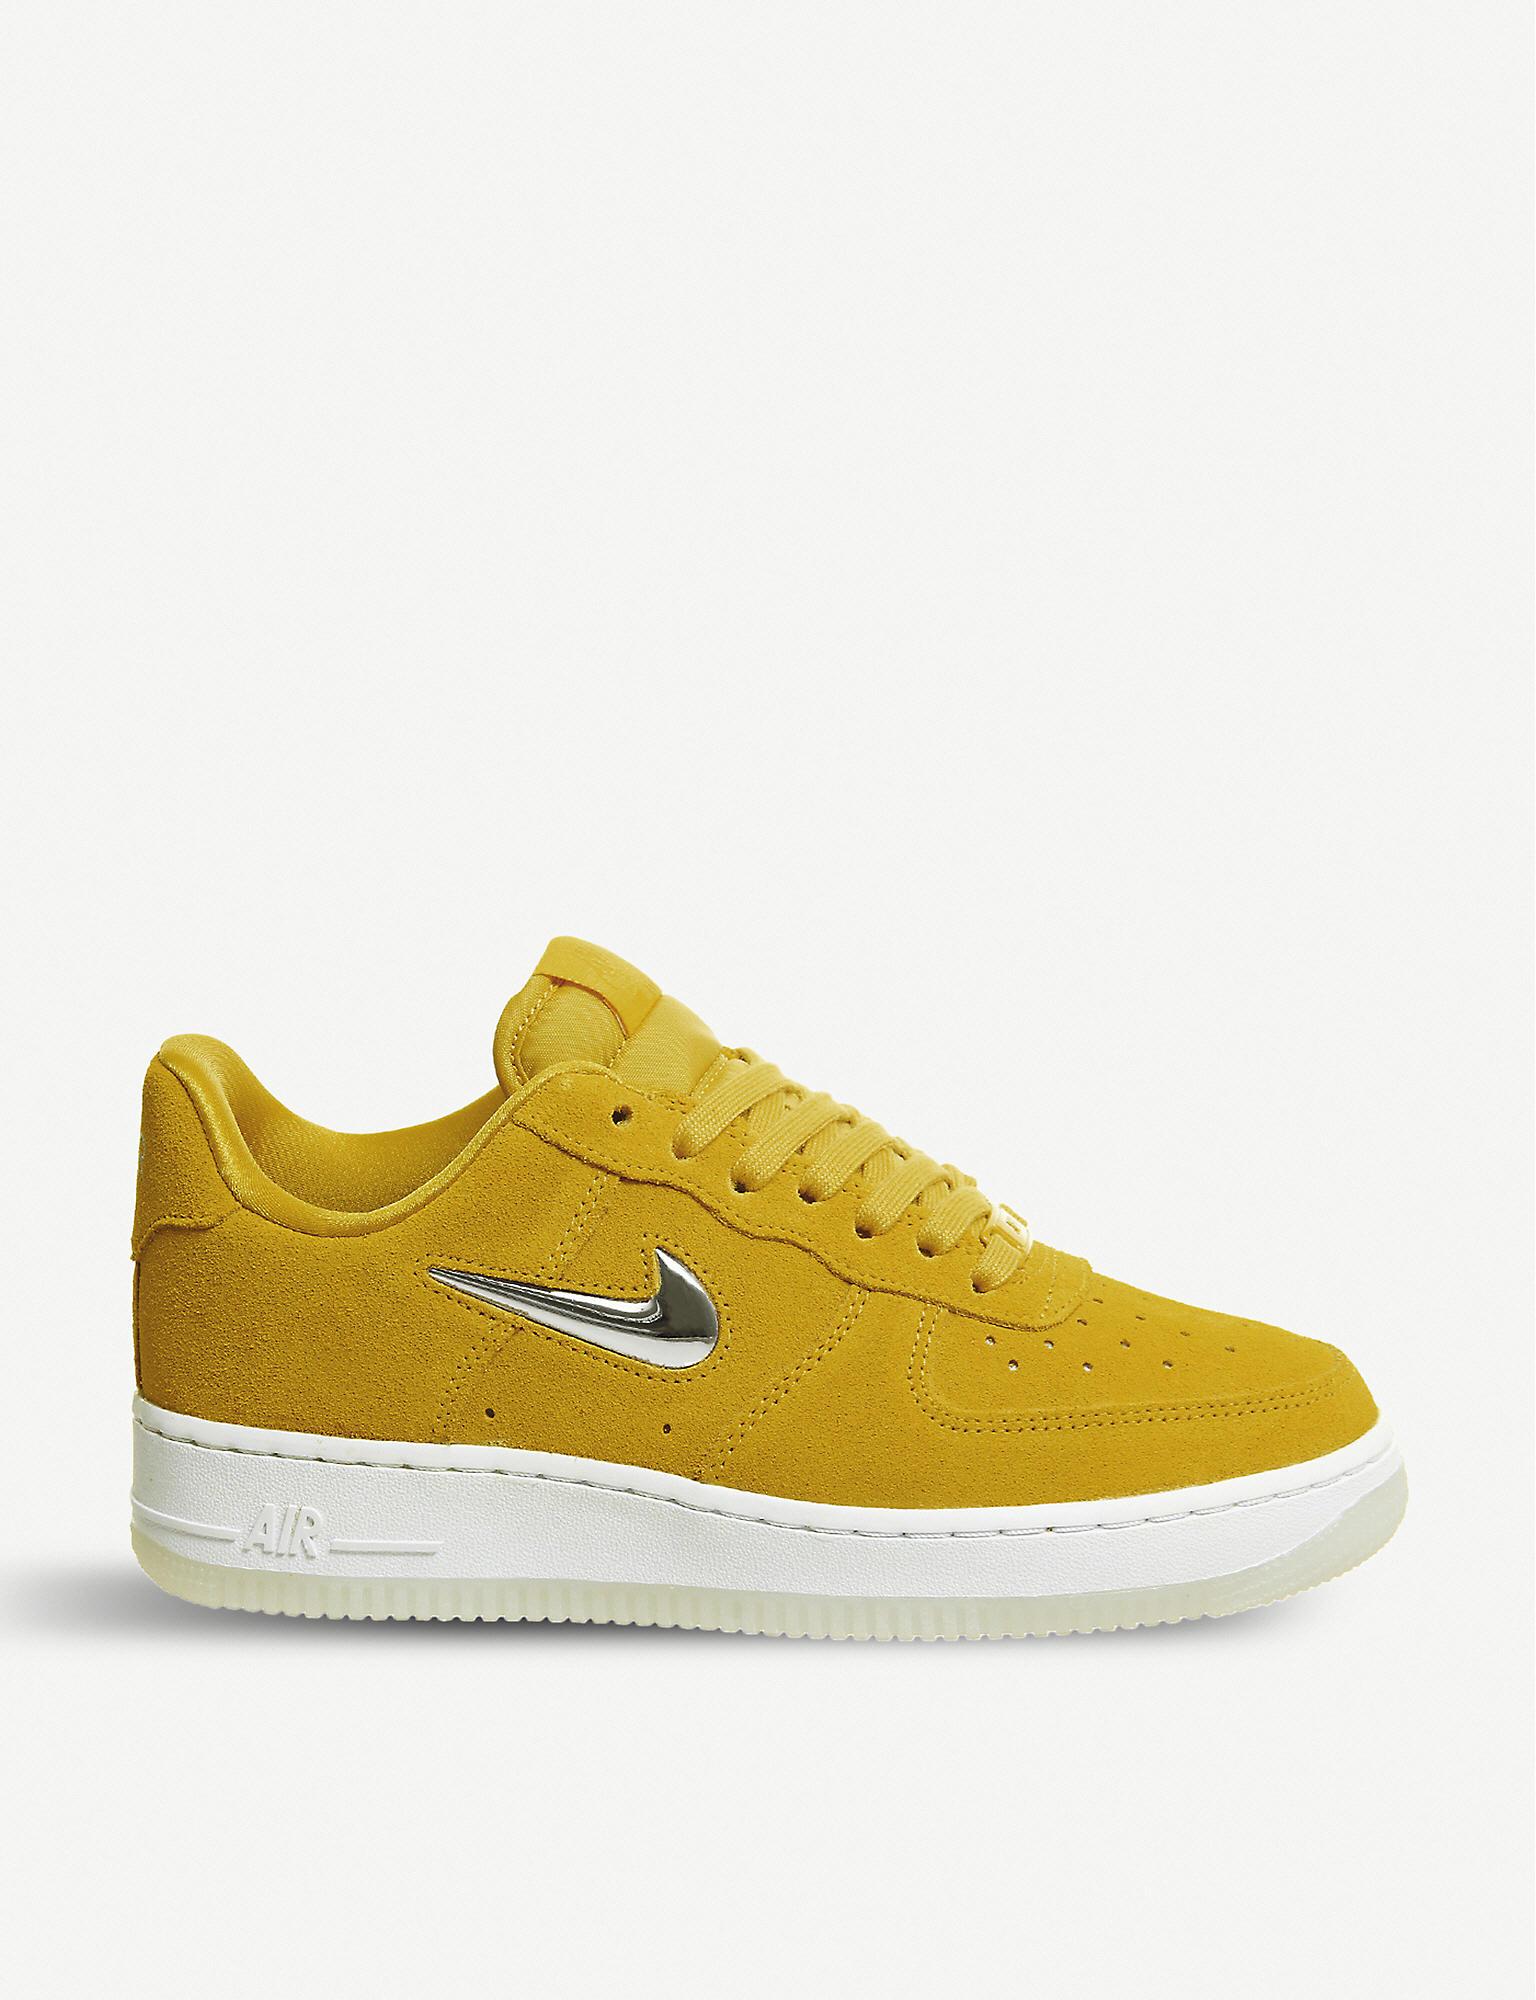 Nike Air Force 1 Jewel Suede Trainers in Yellow for Men - Lyst